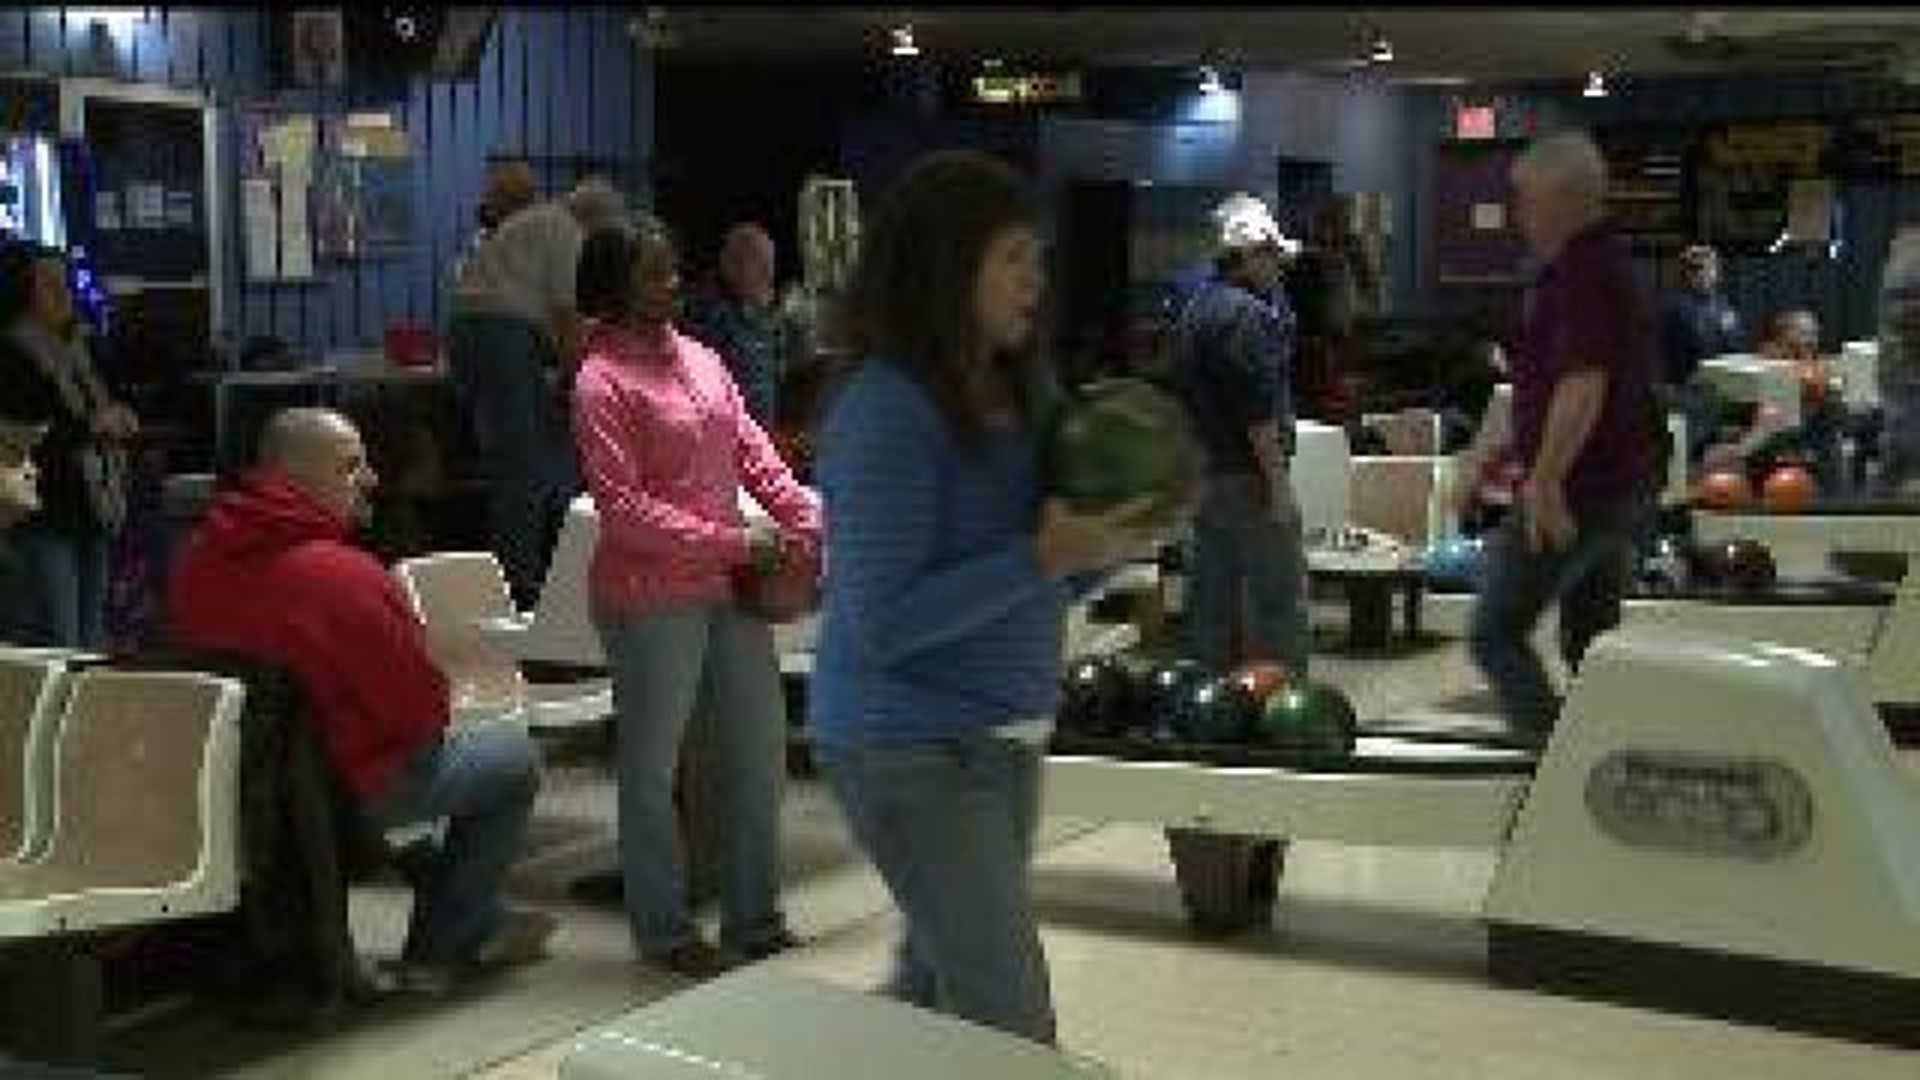 Therapy organization holds fundraiser